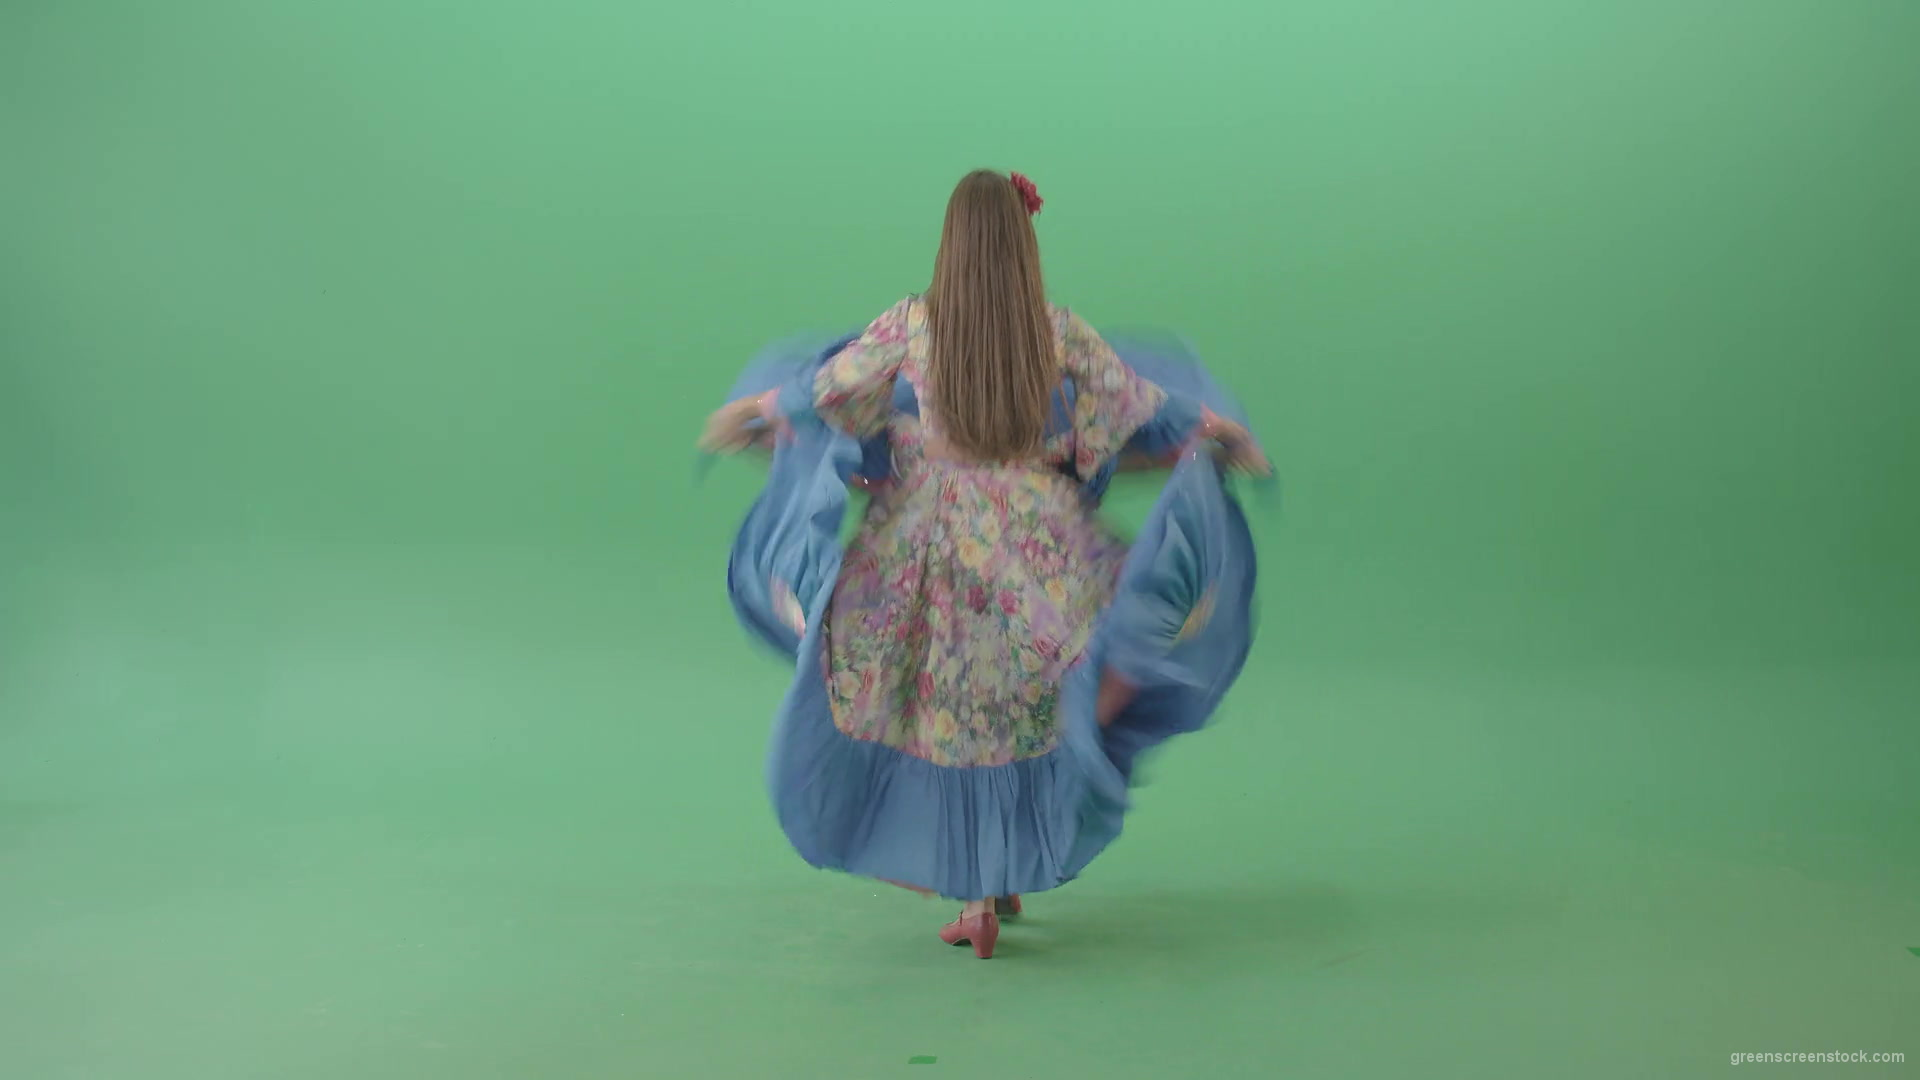 vj video background Dancing-gipsy-girl-waving-balkan-dress-from-back-view-isolated-on-green-screen-4K-Video-Stock-Footage-1920_003